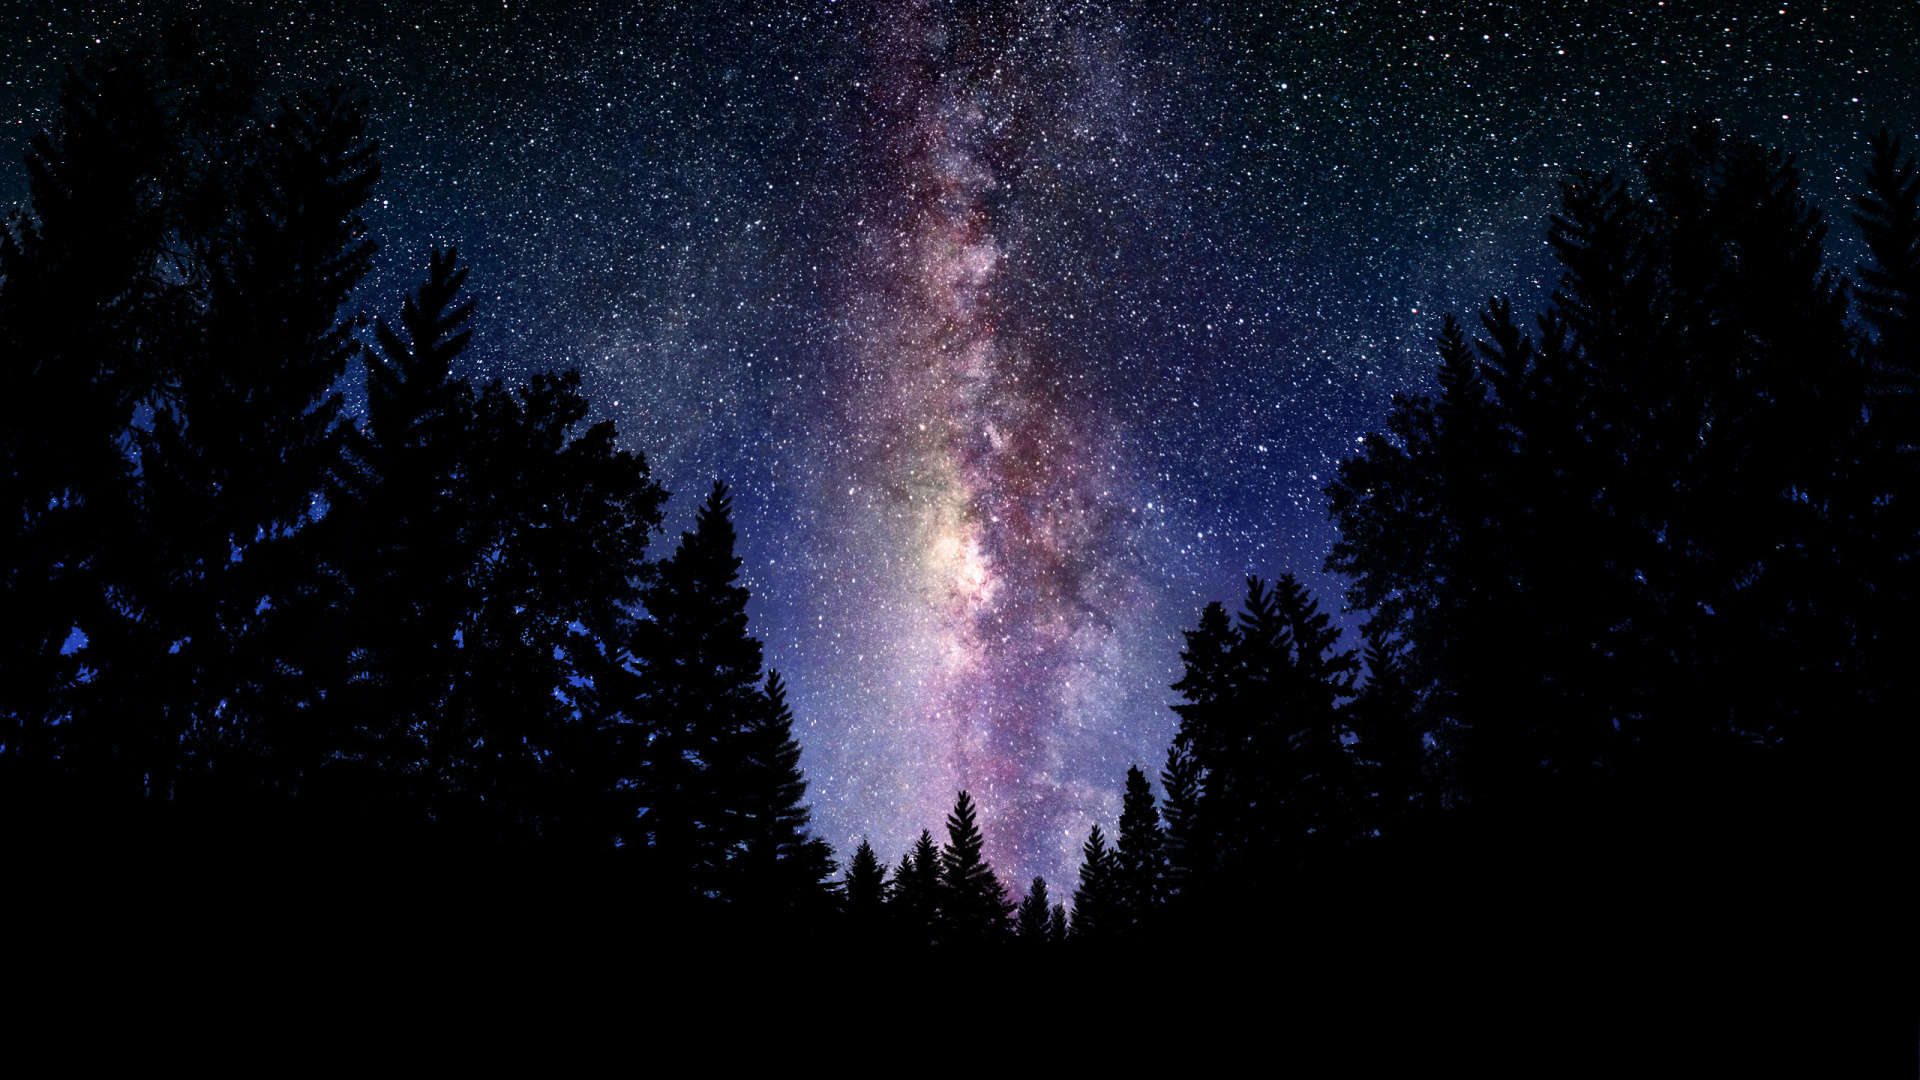 Silhouette of Trees Under Starry Night. Wallpaper in 1920x1080 Resolution